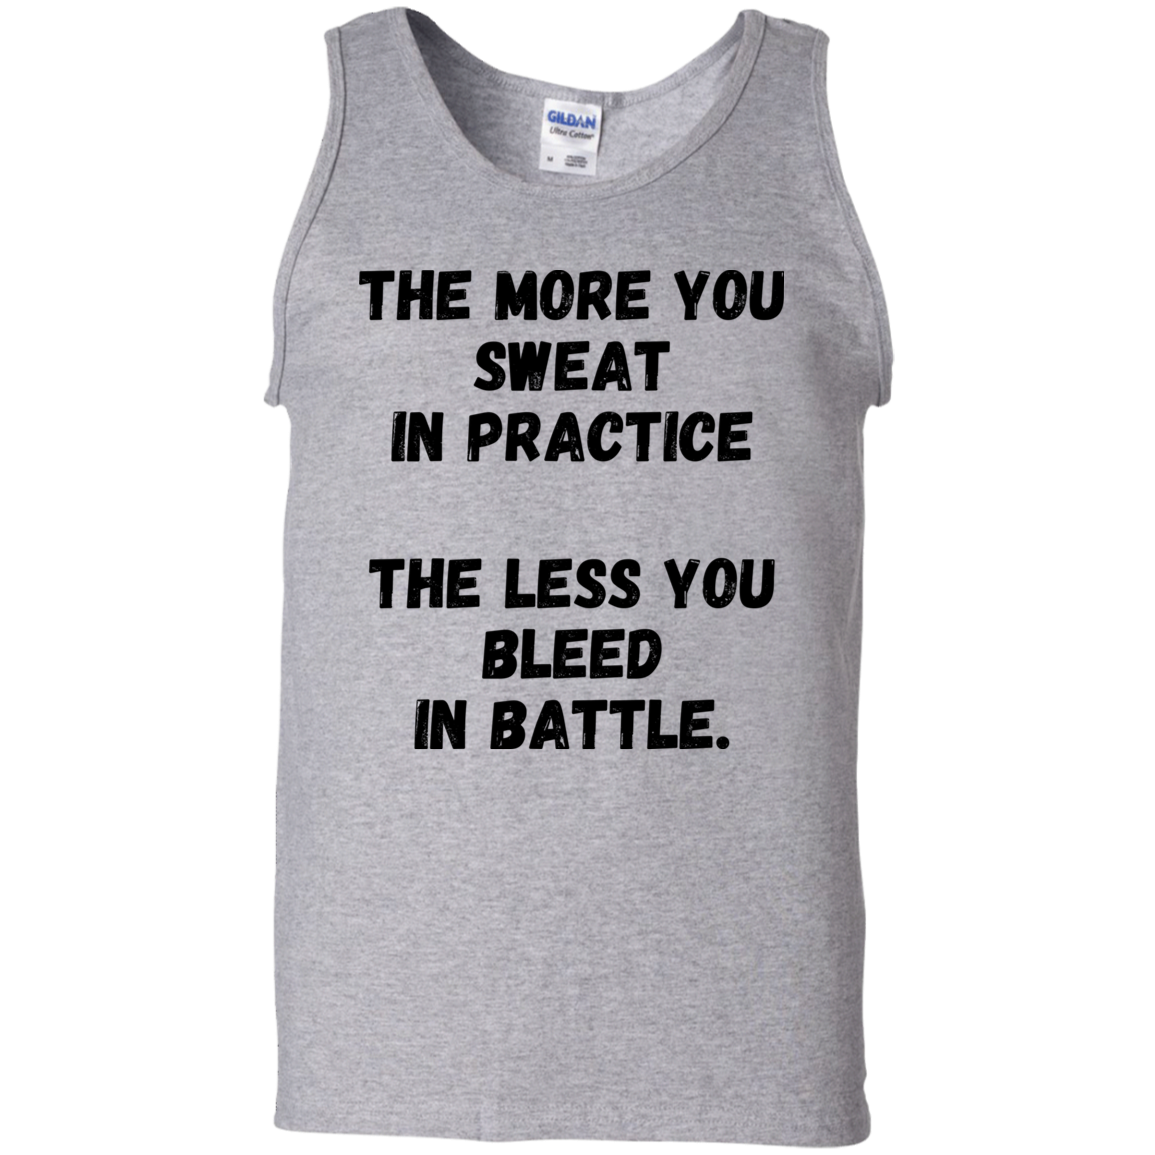 The More You Sweat In Practice, The Less You Bleed In Battle - Men's Tank Top